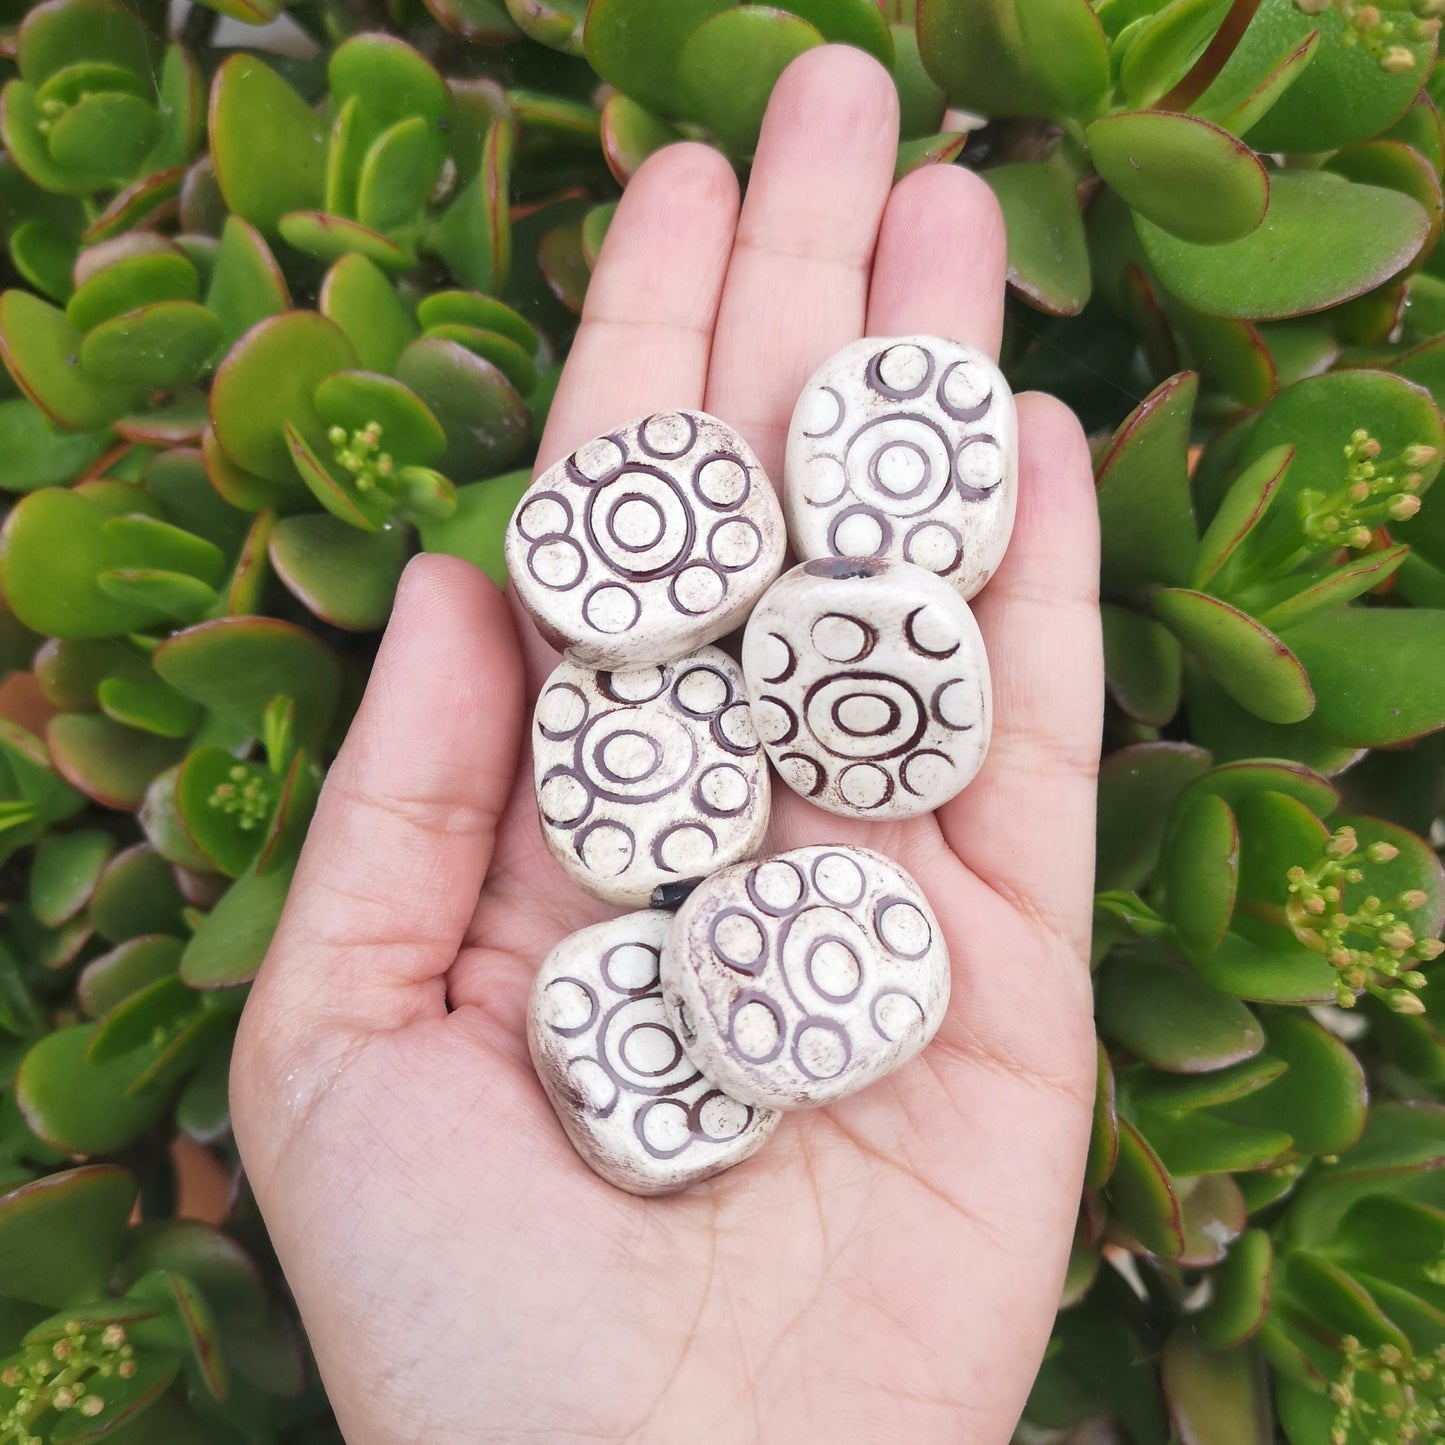 Handmade Ceramic Beads, Unique Clay Jewelry Beads, Unusual Porcelain Beads, Decorative Oval Beads For Crafts - Ceramica Ana Rafael